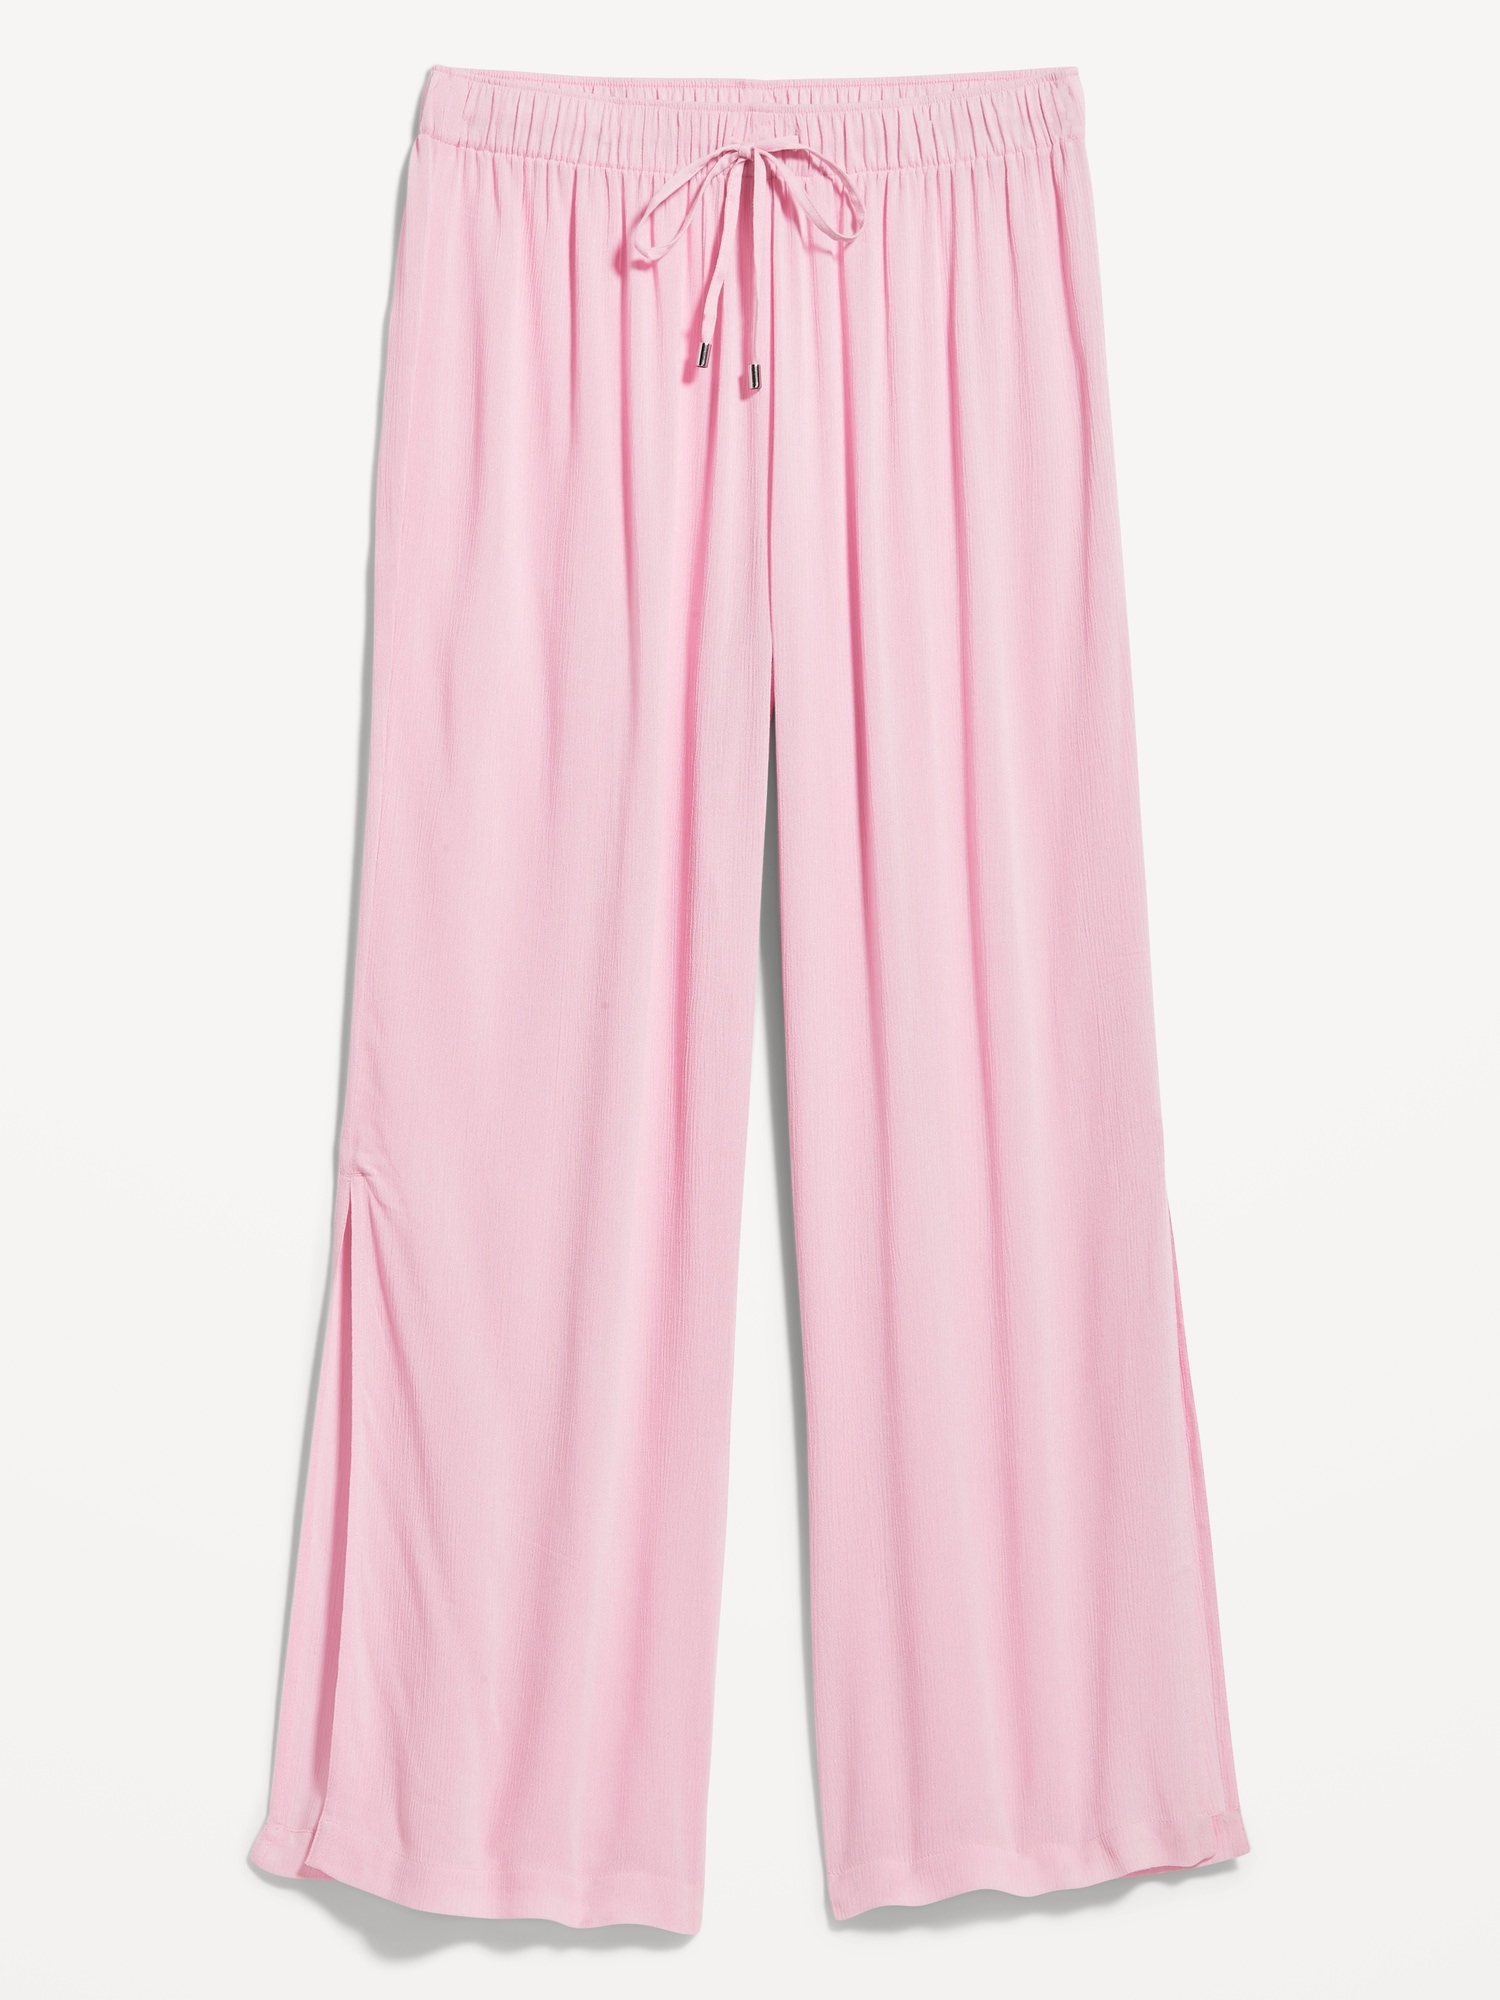 High-Waisted Lightweight Wide-Leg Cover-Up Pants for Women | Old Navy